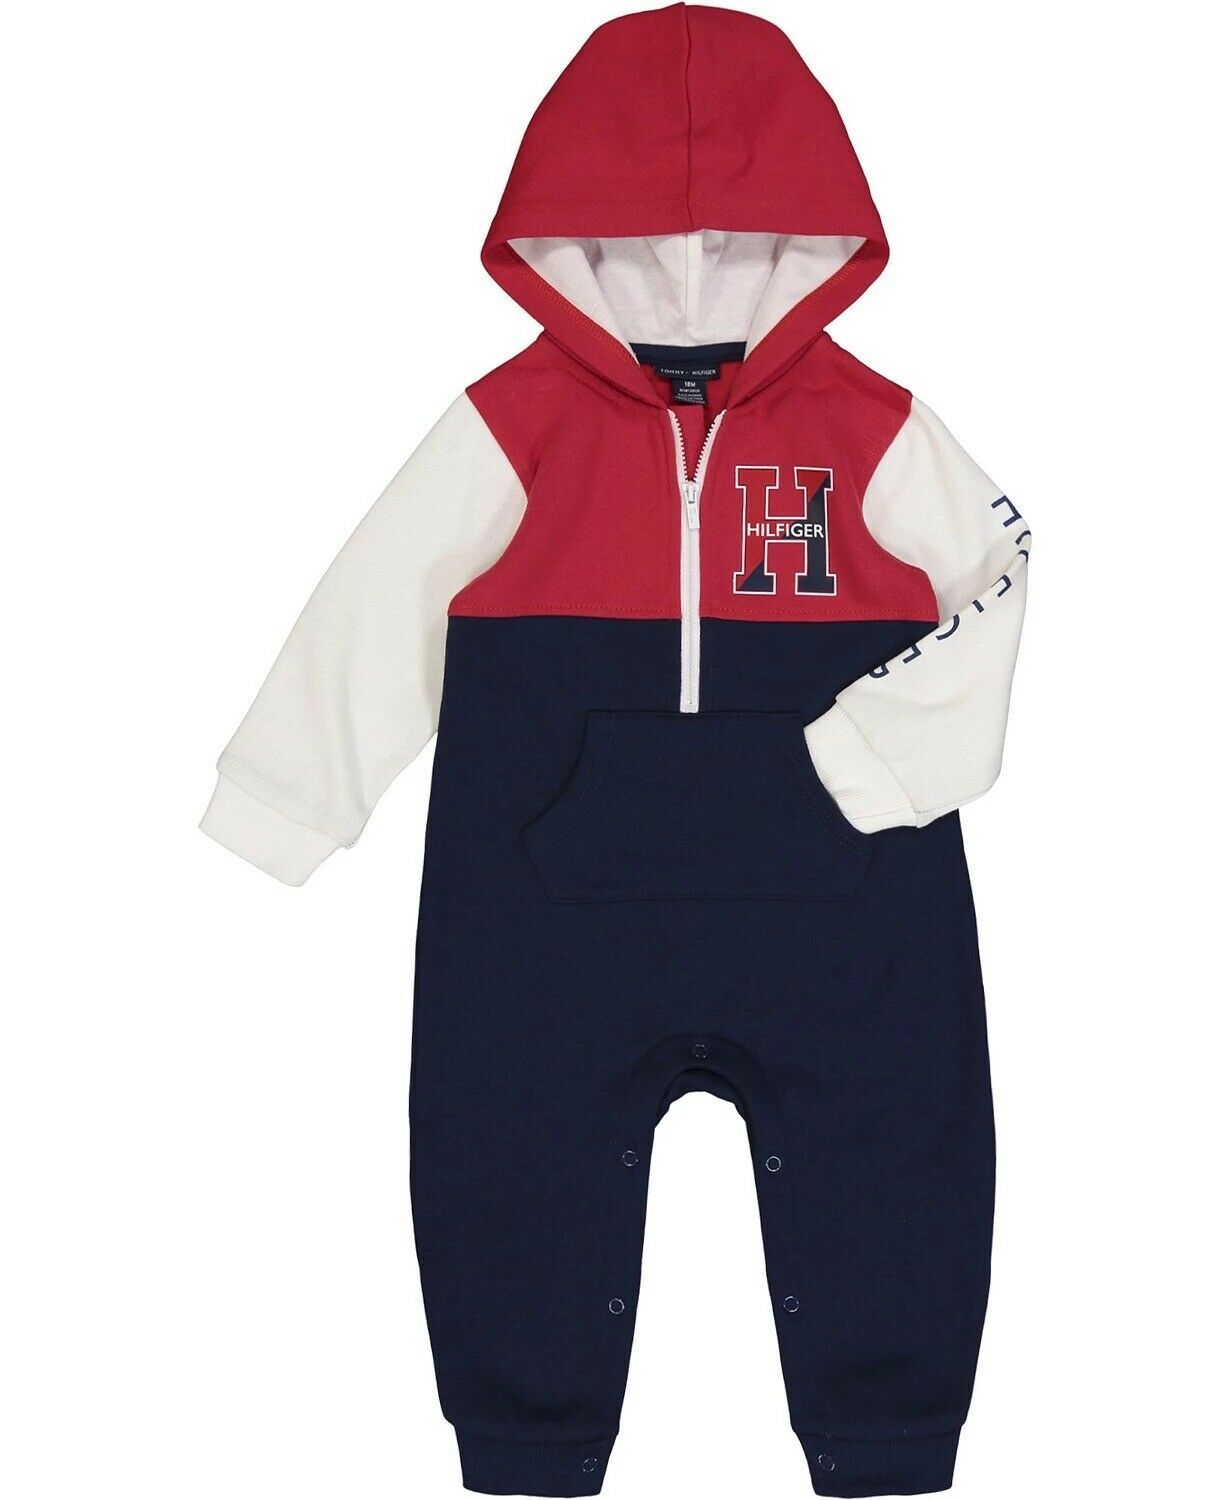 Tommy Hilfiger RED/NAVY ASSORTED Boys' Red & Navy Logo Hooded Playsuit, US 18M